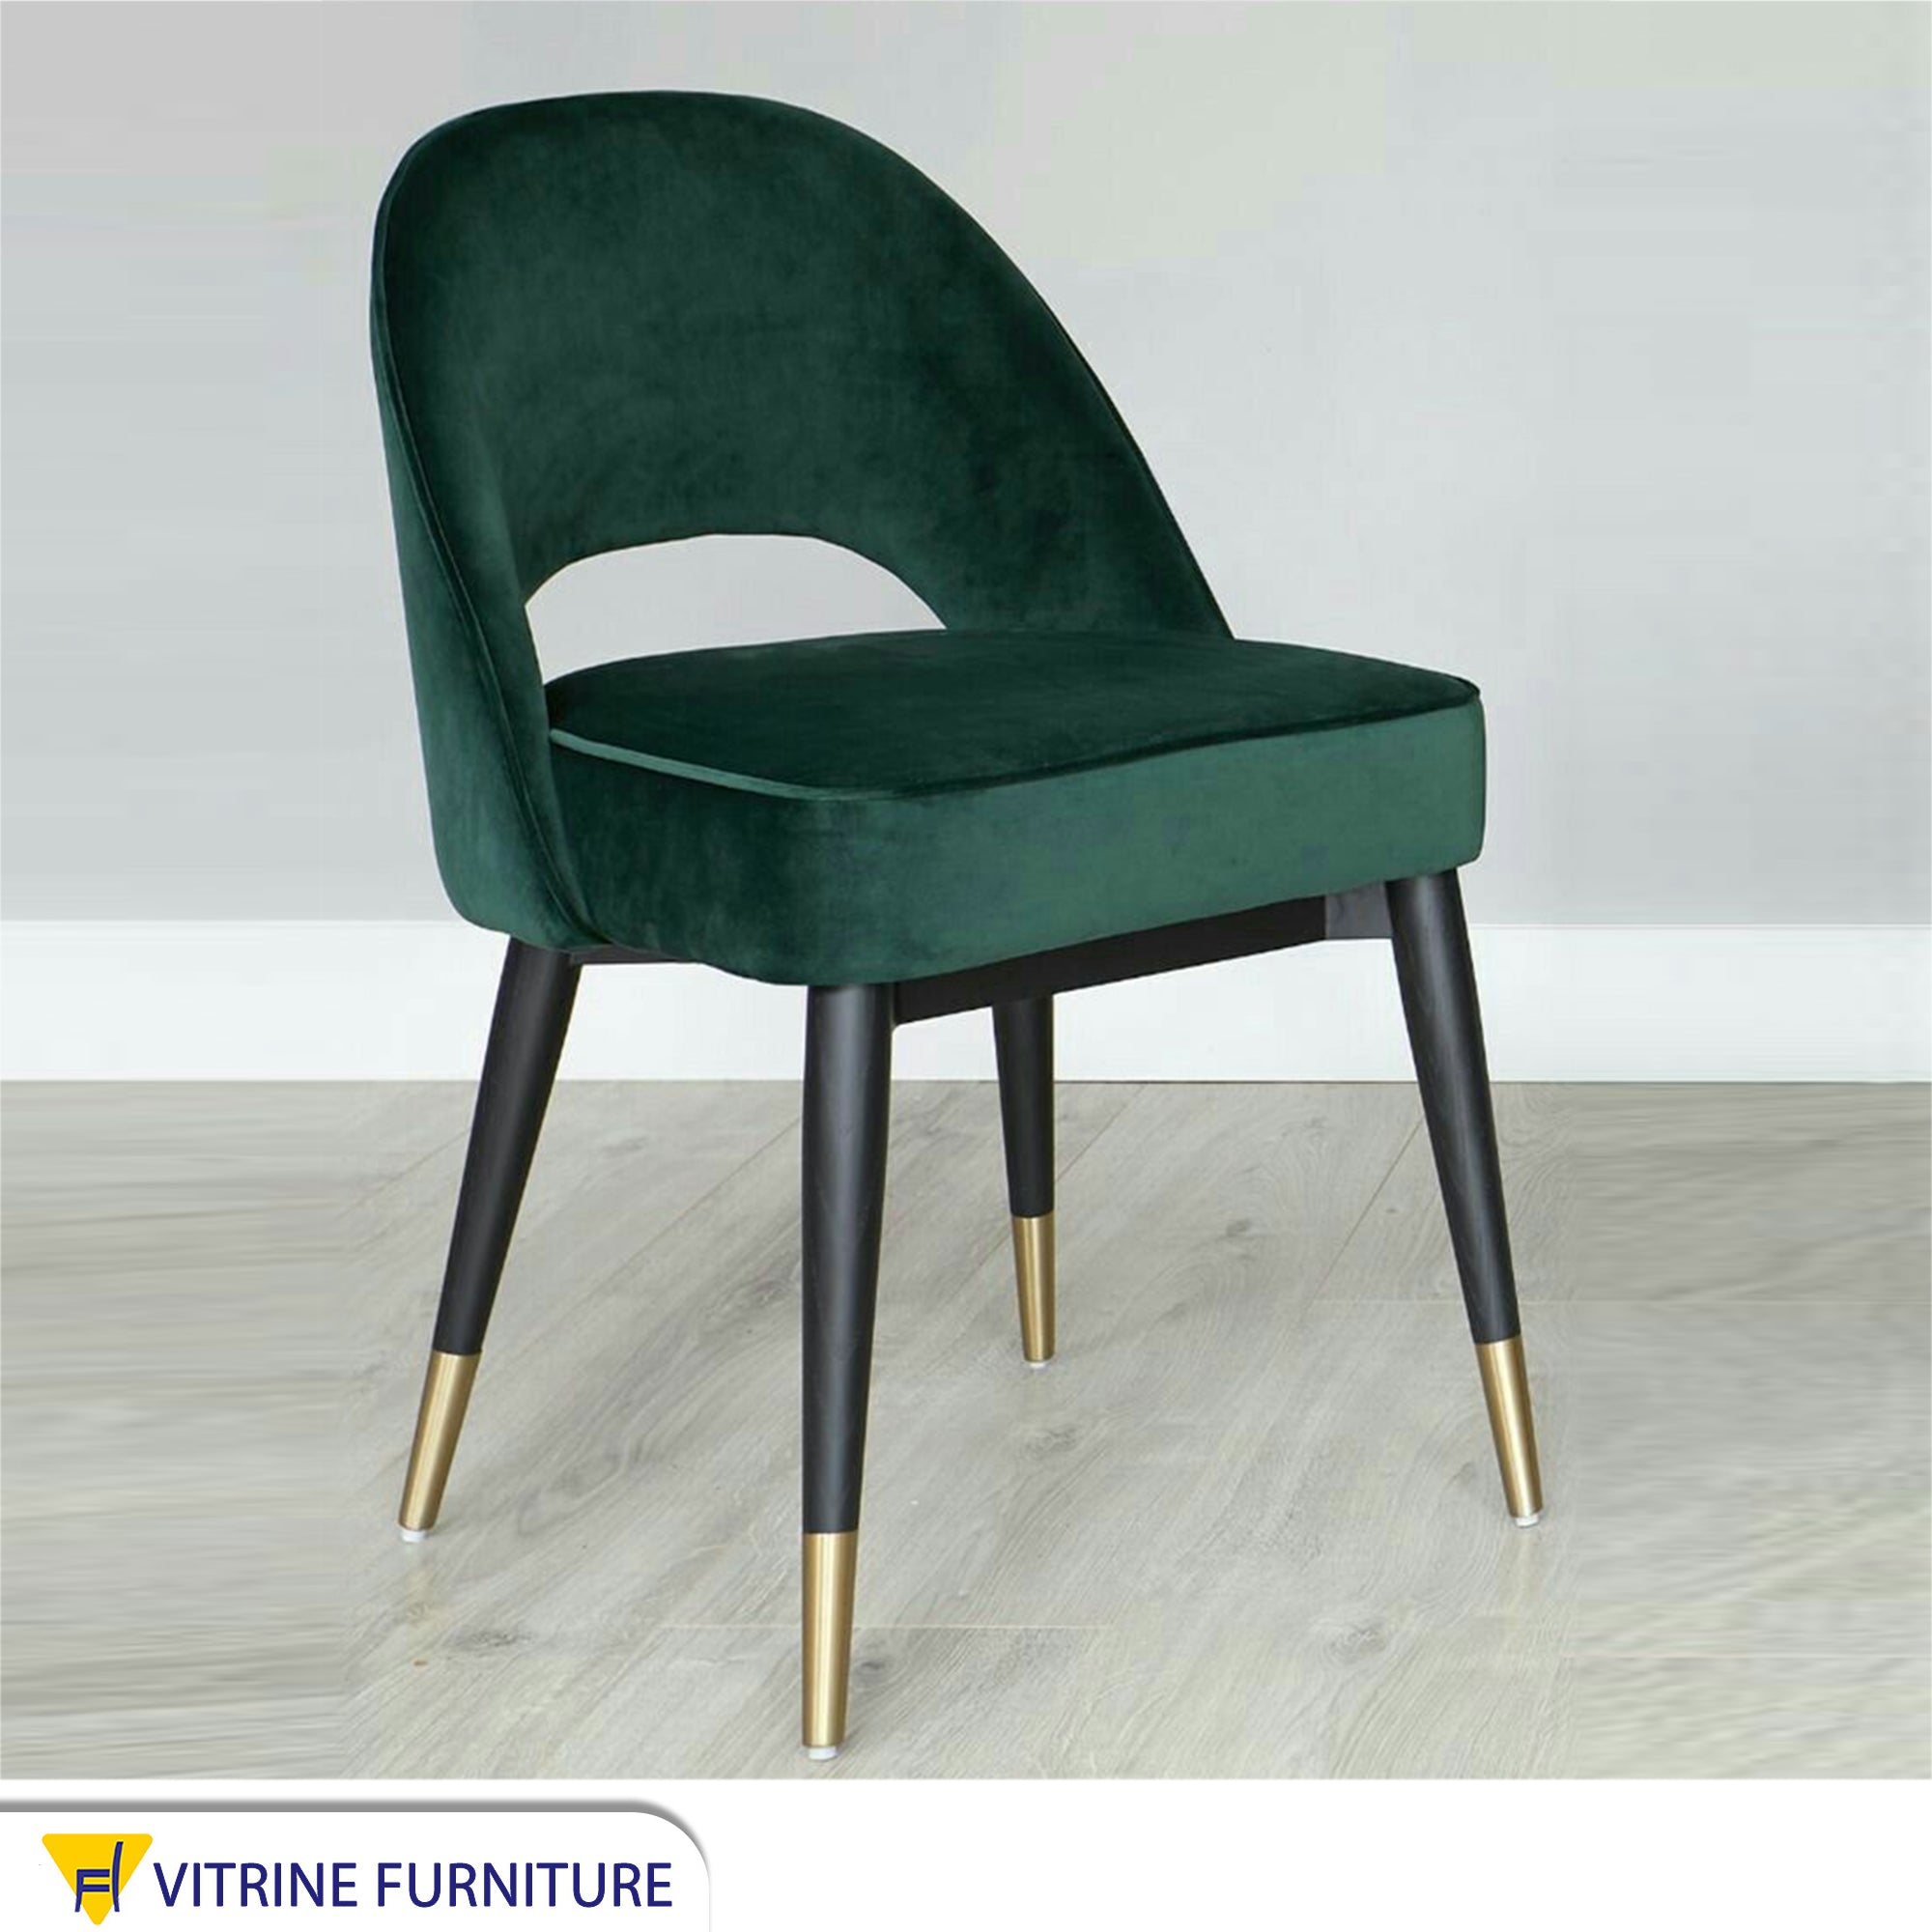 Round back chair upholstered in drak green